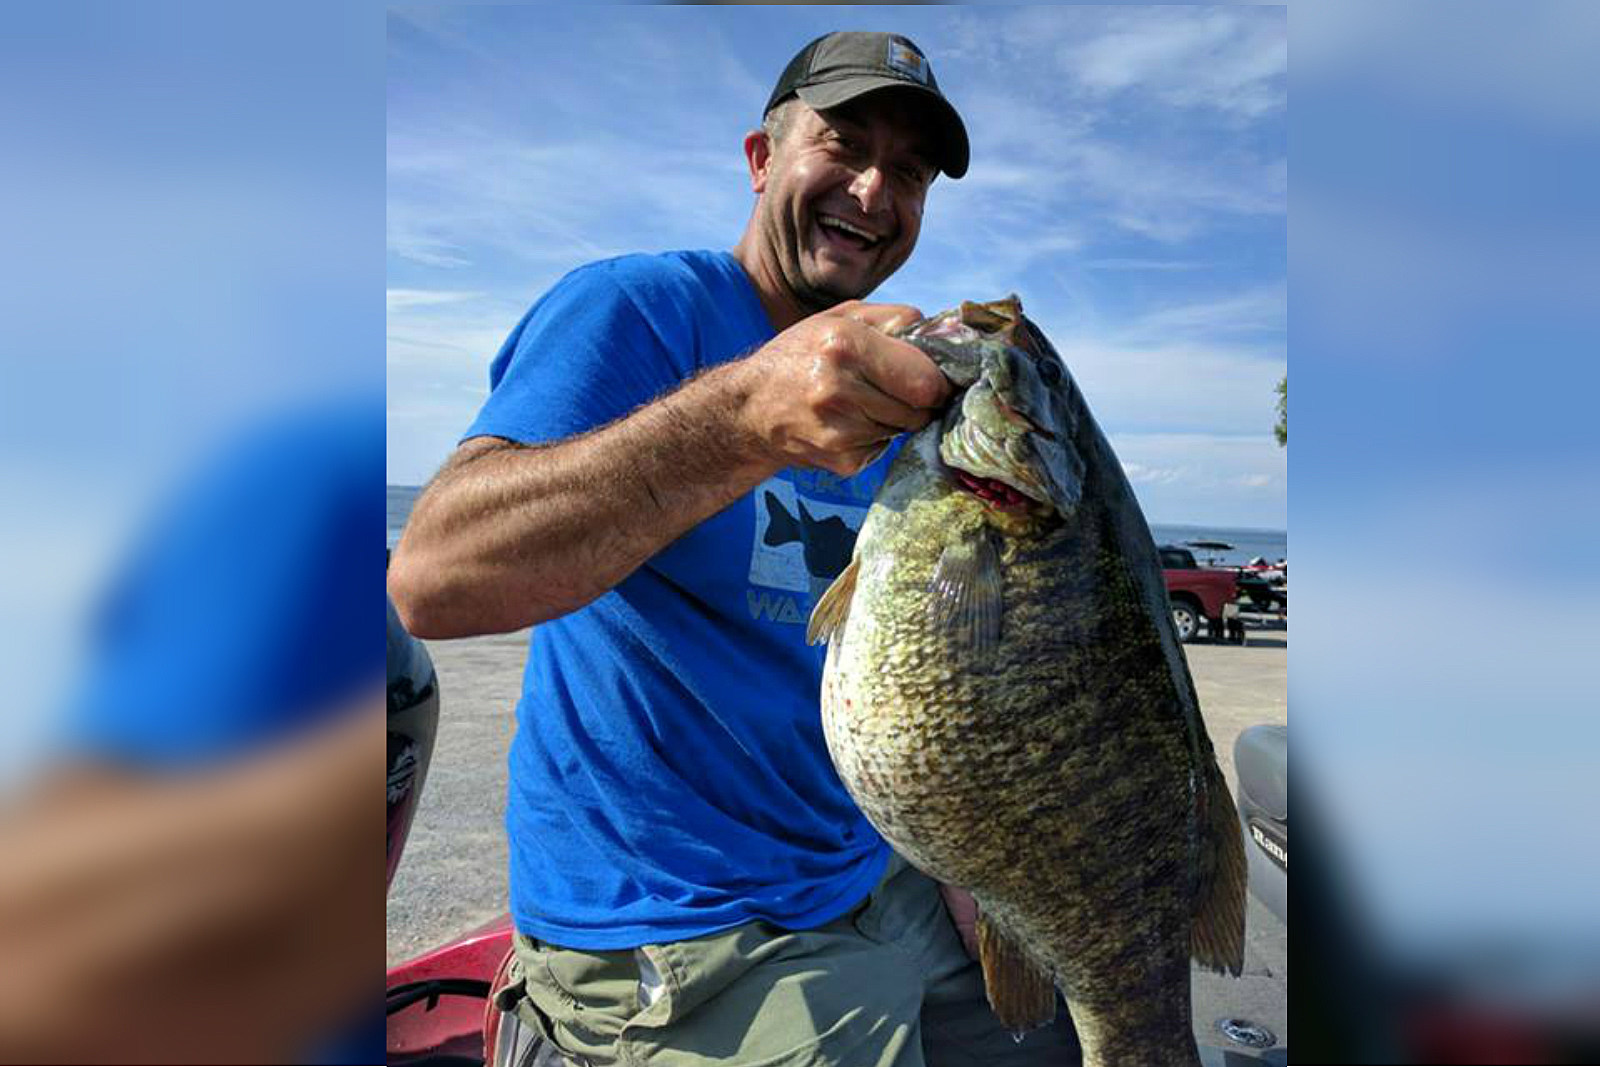 State Smallmouth Record Caught in Cape Vincent, New York During NY TBF  Event on St. Lawrence River – The Bass Federation (TBF)